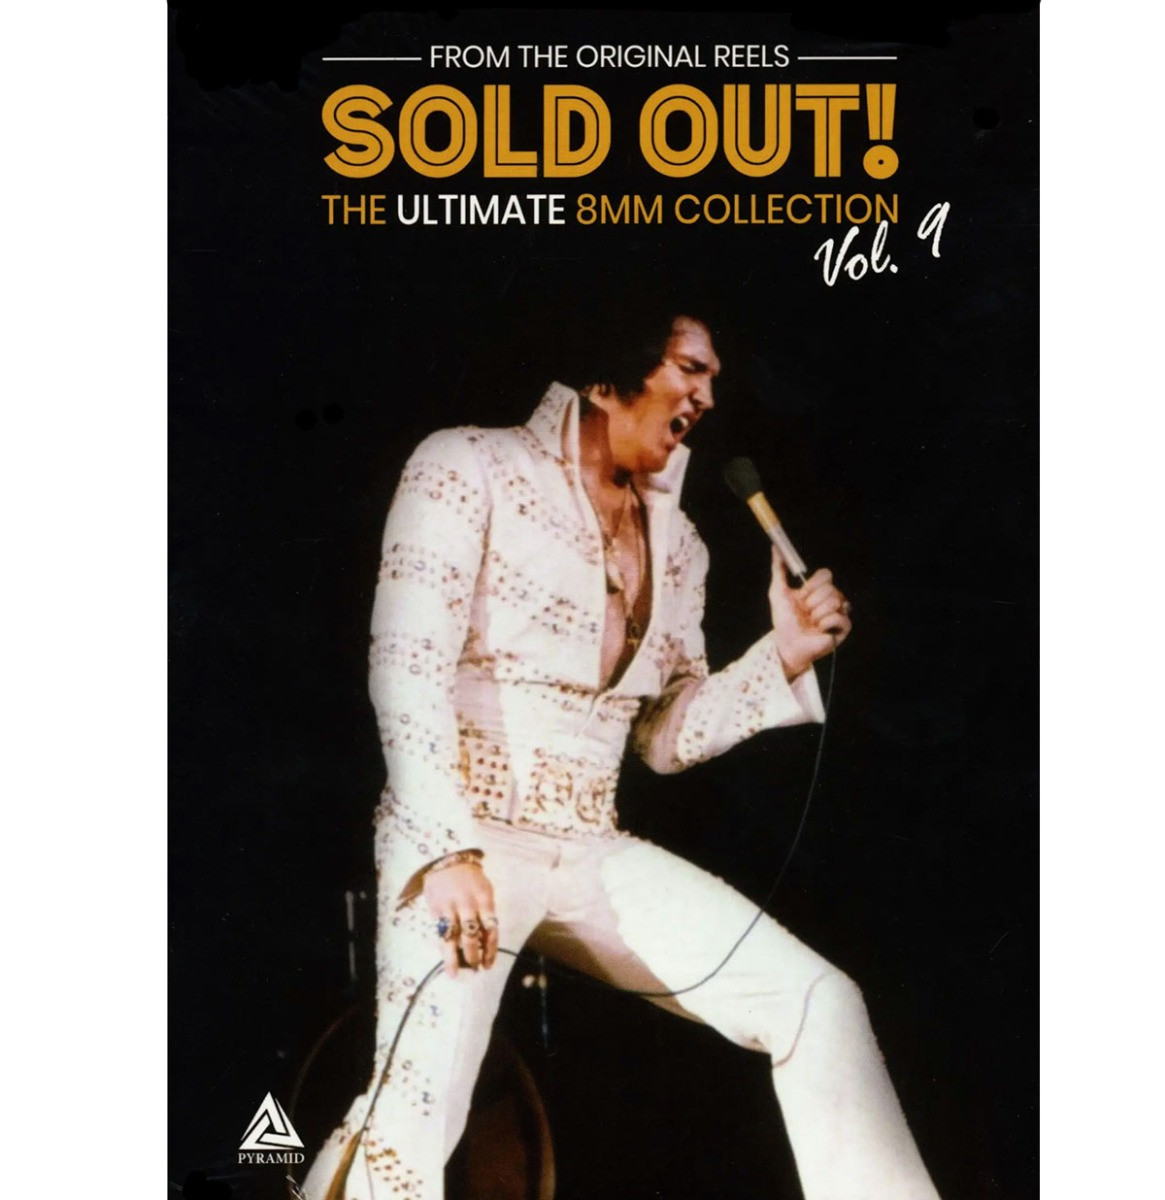 Elvis Presley: Sold Out! The Ultimate 8MM Collection Vol. 9 - 2 DVD Set